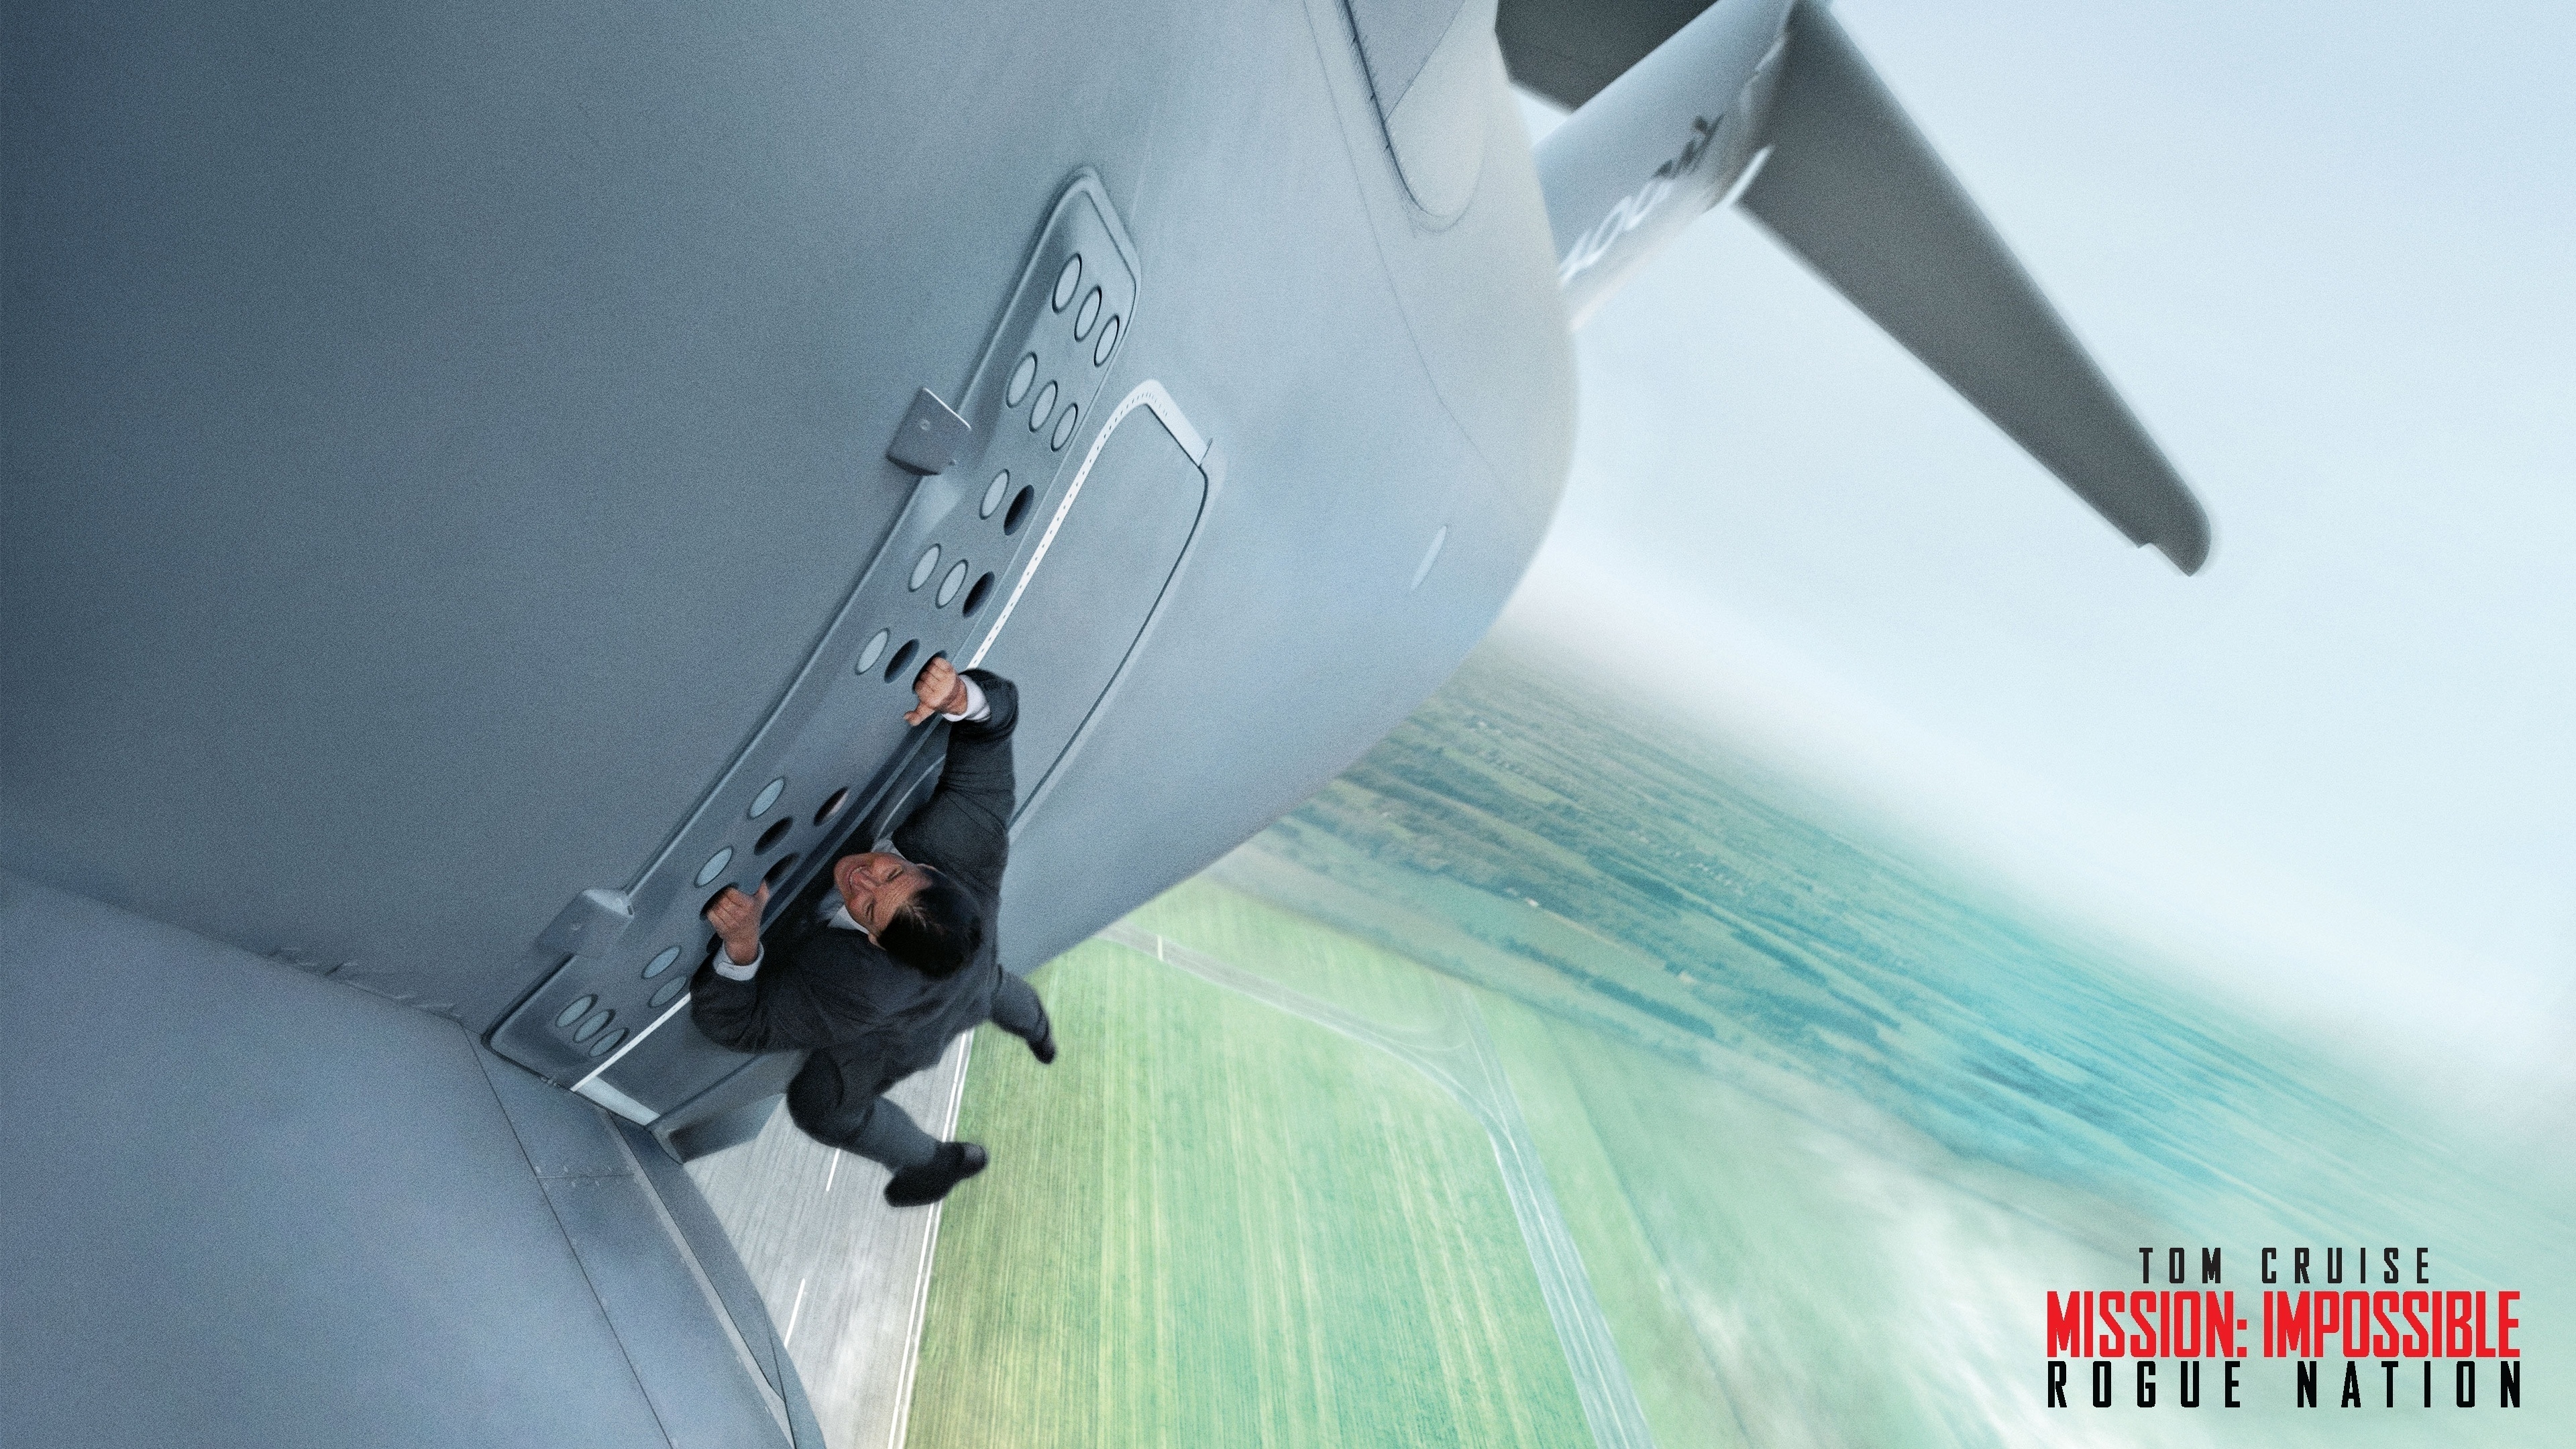 Mission Impossible Rogue Nation for 3840 x 2160 Ultra HD resolution